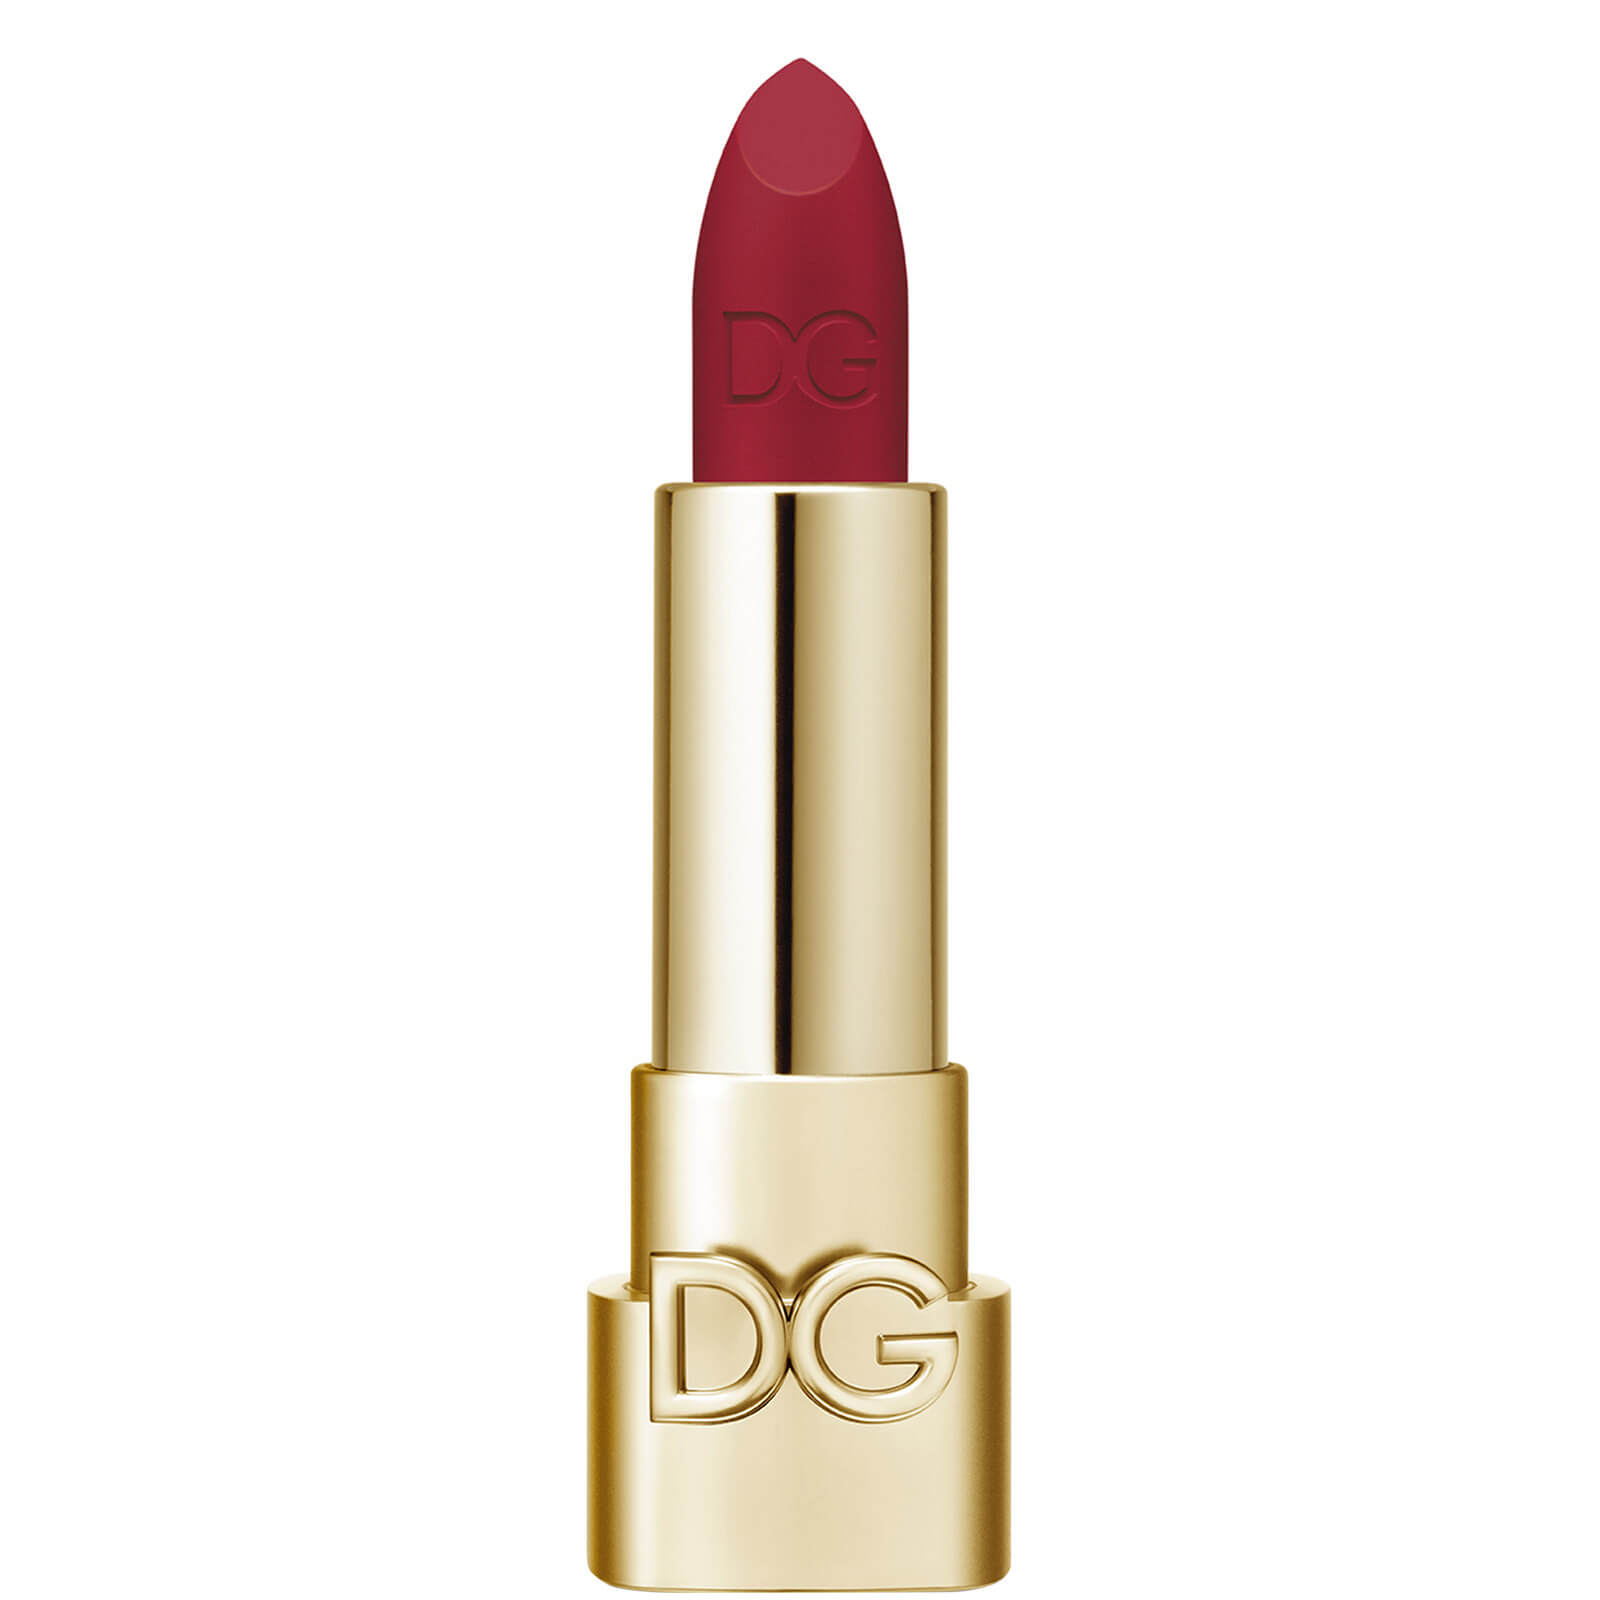 dolce&gabbana the only one matte lipstick 3.5g (various shades) - #dgamore